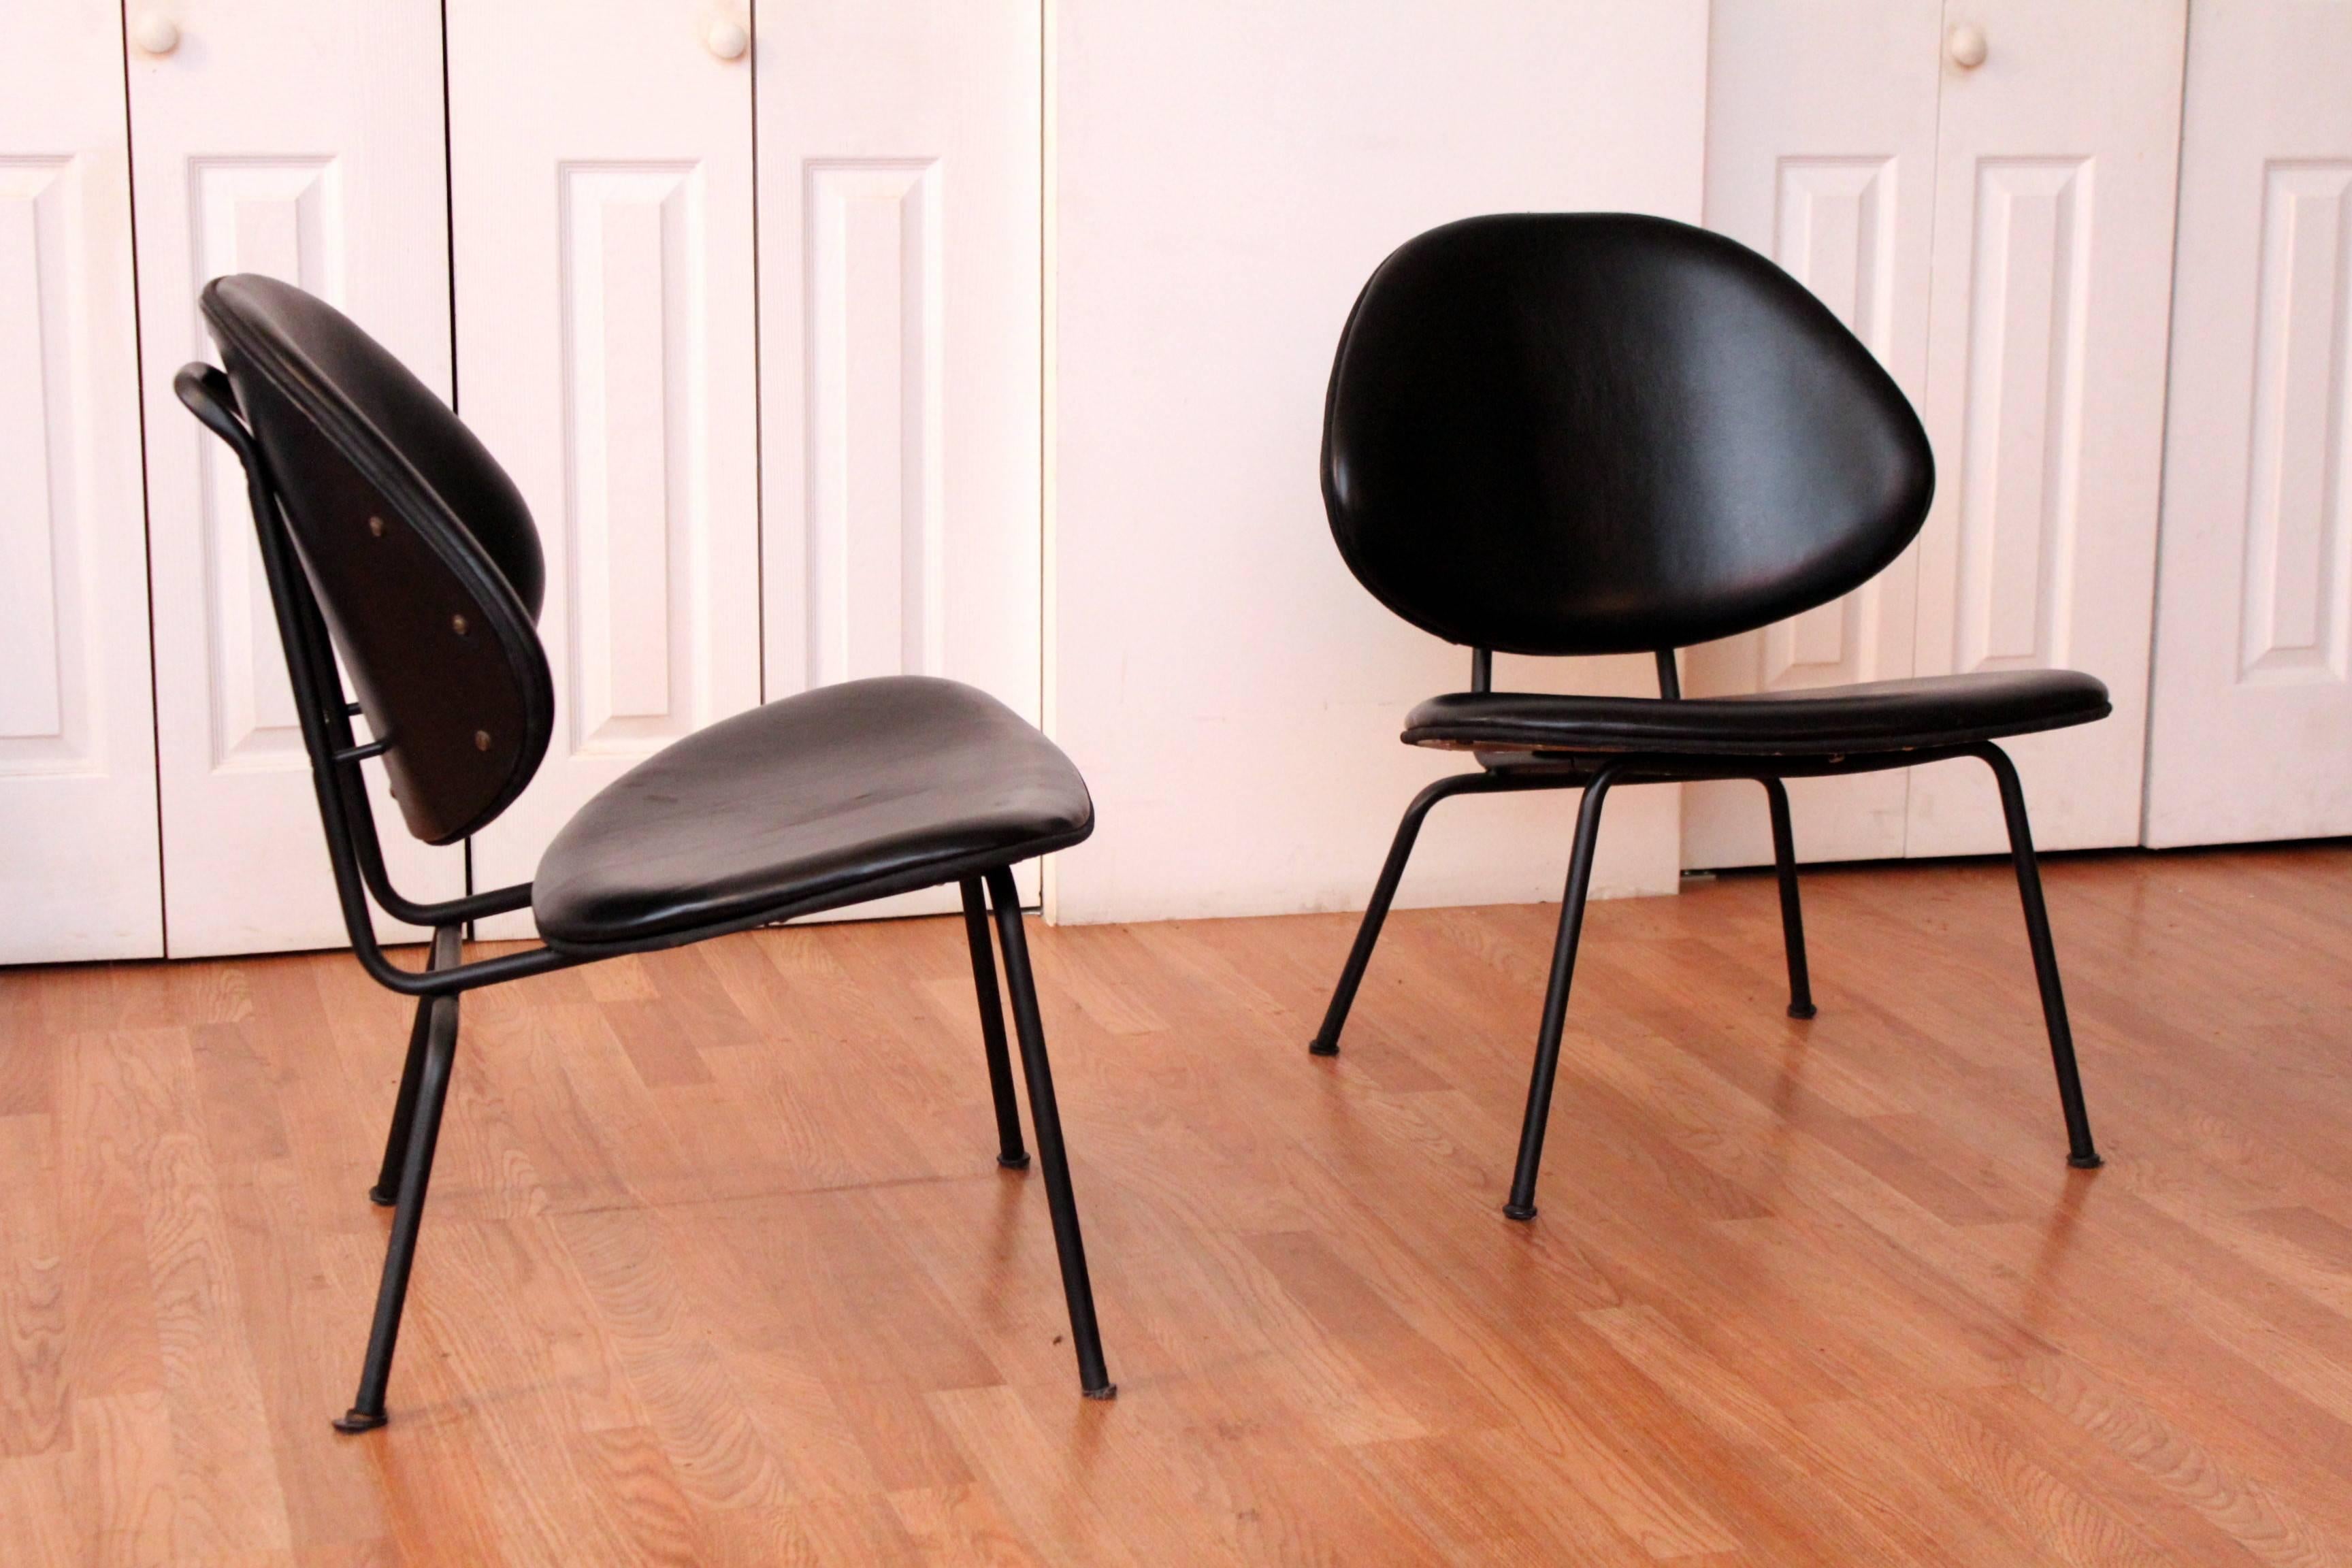 A pair of Mid-Century tubular clam shell chairs by Homecrest. These chairs were recently recovered in a rich black leather and offer an amazing sit.